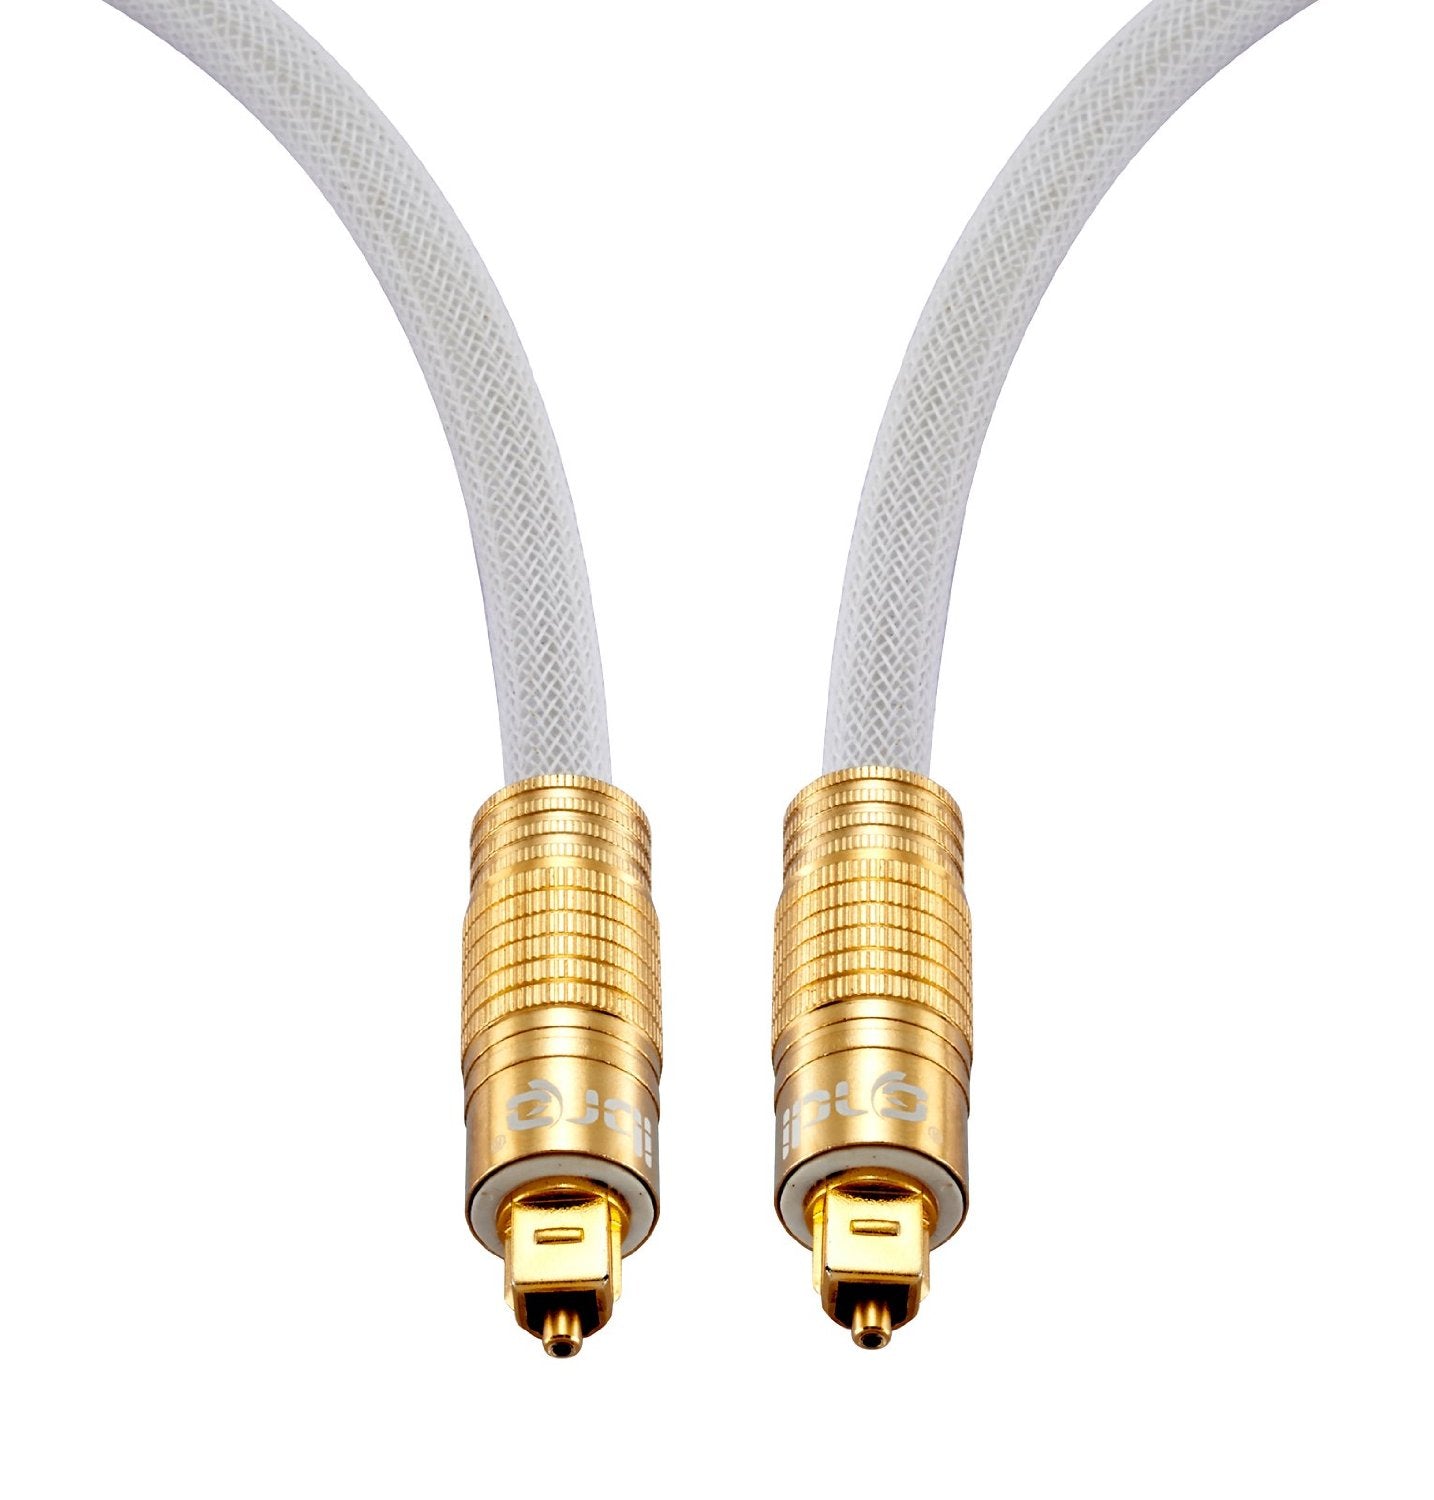 IBRA 2M PREMIUM WHITE Ultra High Resolution Professional Digital Optical TOSlink Gold Cable - 24k Gold Casing - Compatible with PS3,Sky HD, HDtvs, Blu-rays, AV Amps ~ Superior-Quality optical fiber to deliver better clarity and transfer digital signal